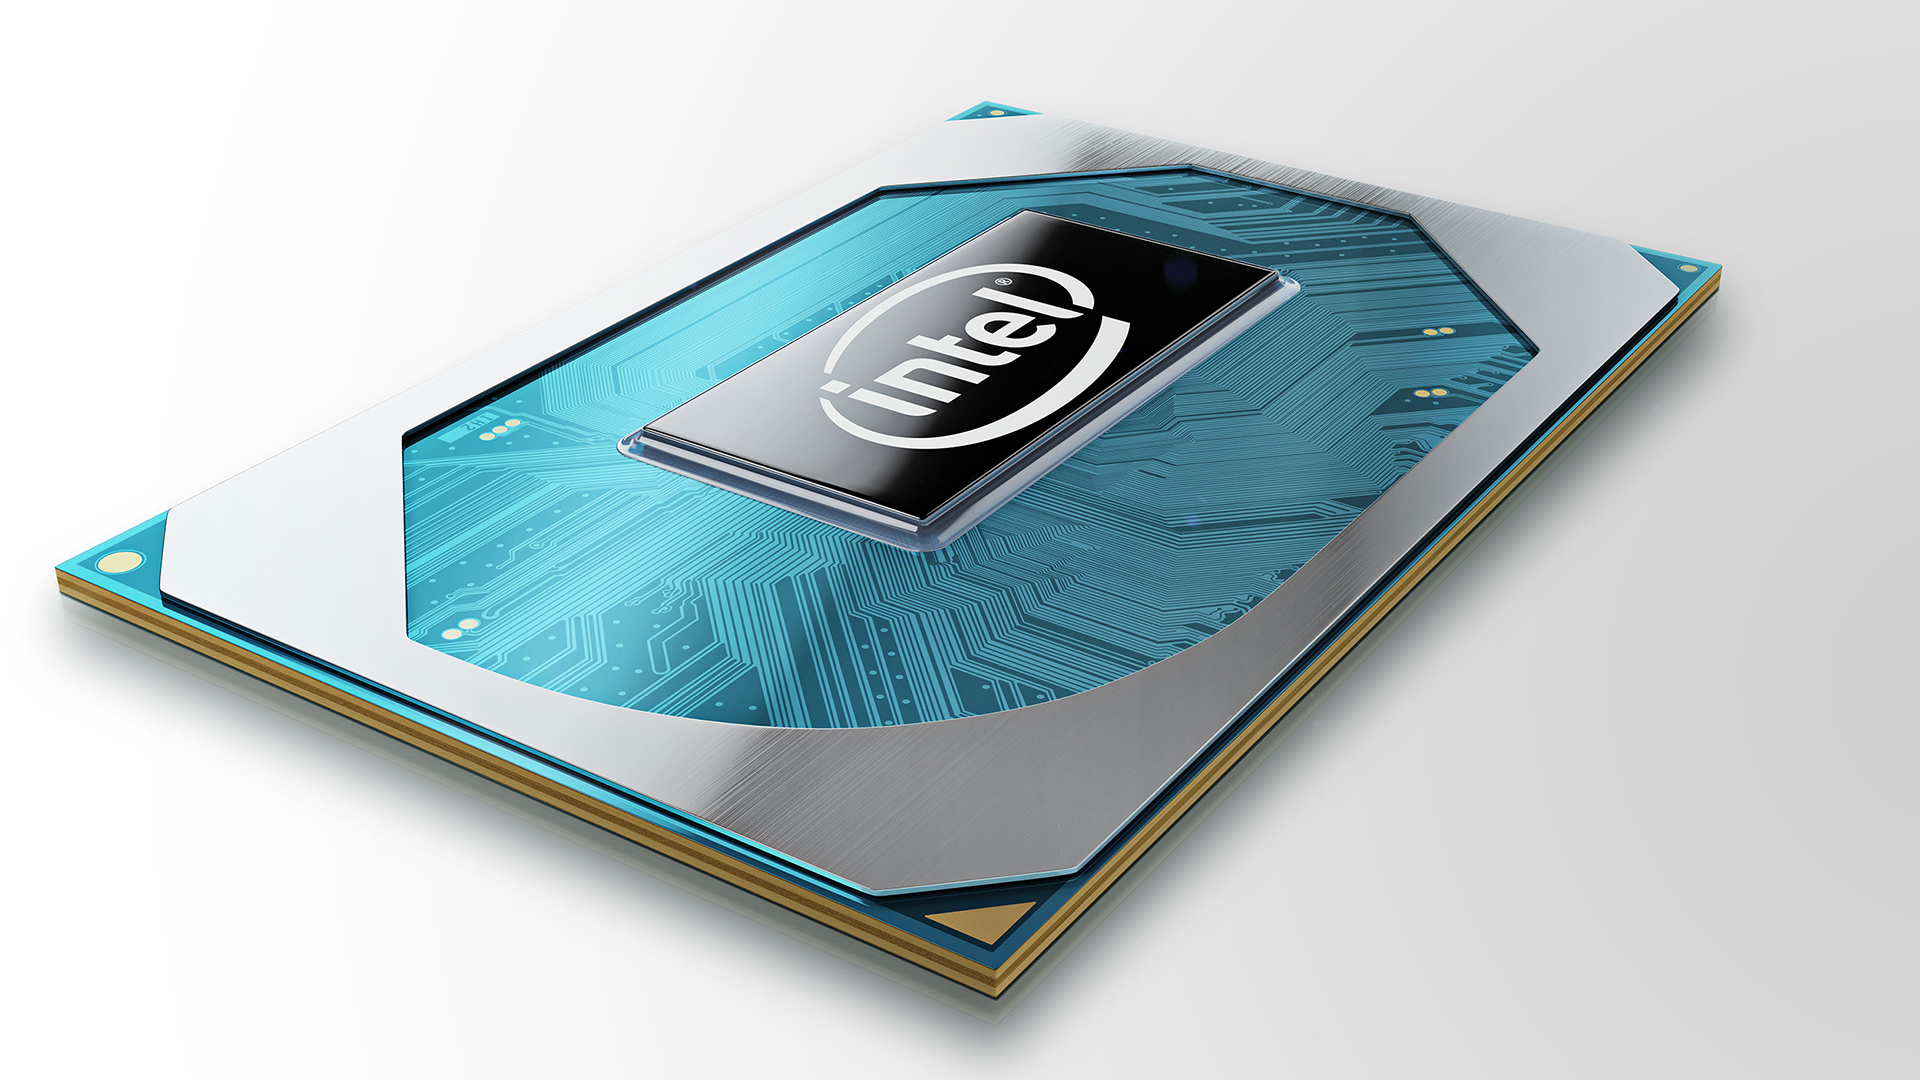 intel’s-8-core-&-6-core-tiger-lake-h-specifications-listed